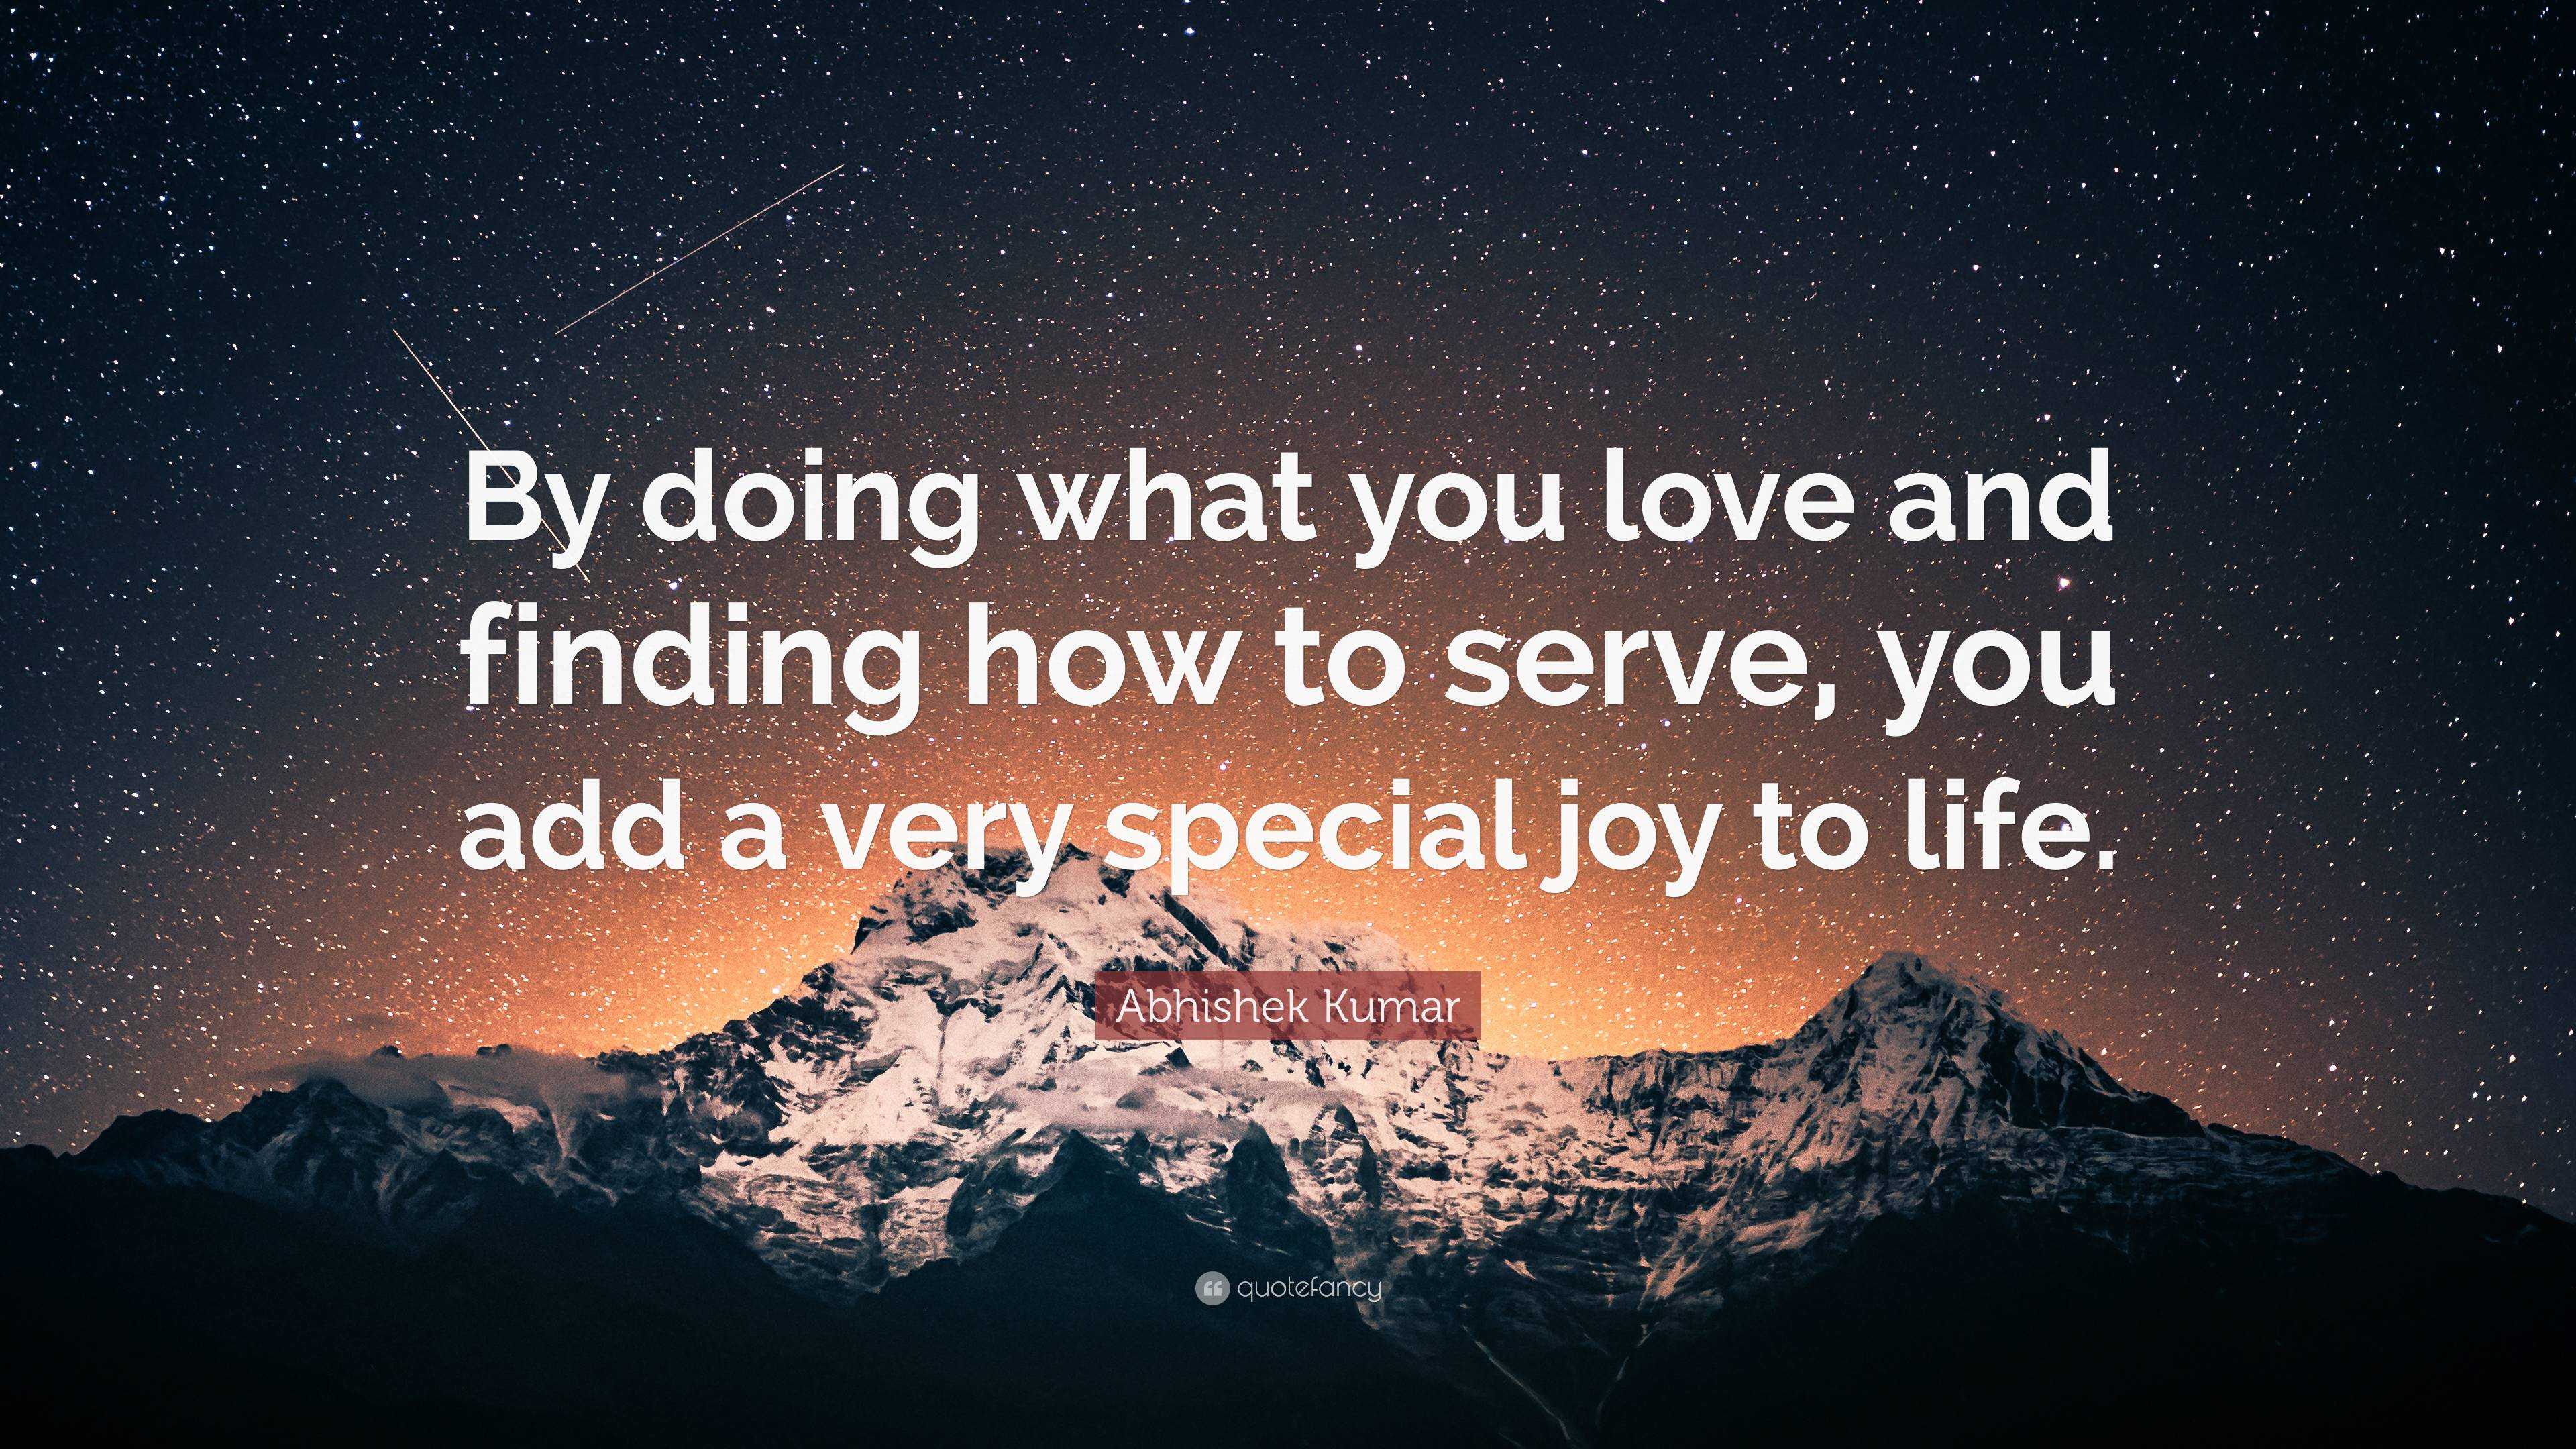 Abhishek Kumar Quote: “By doing what you love and finding how to serve, you  add a